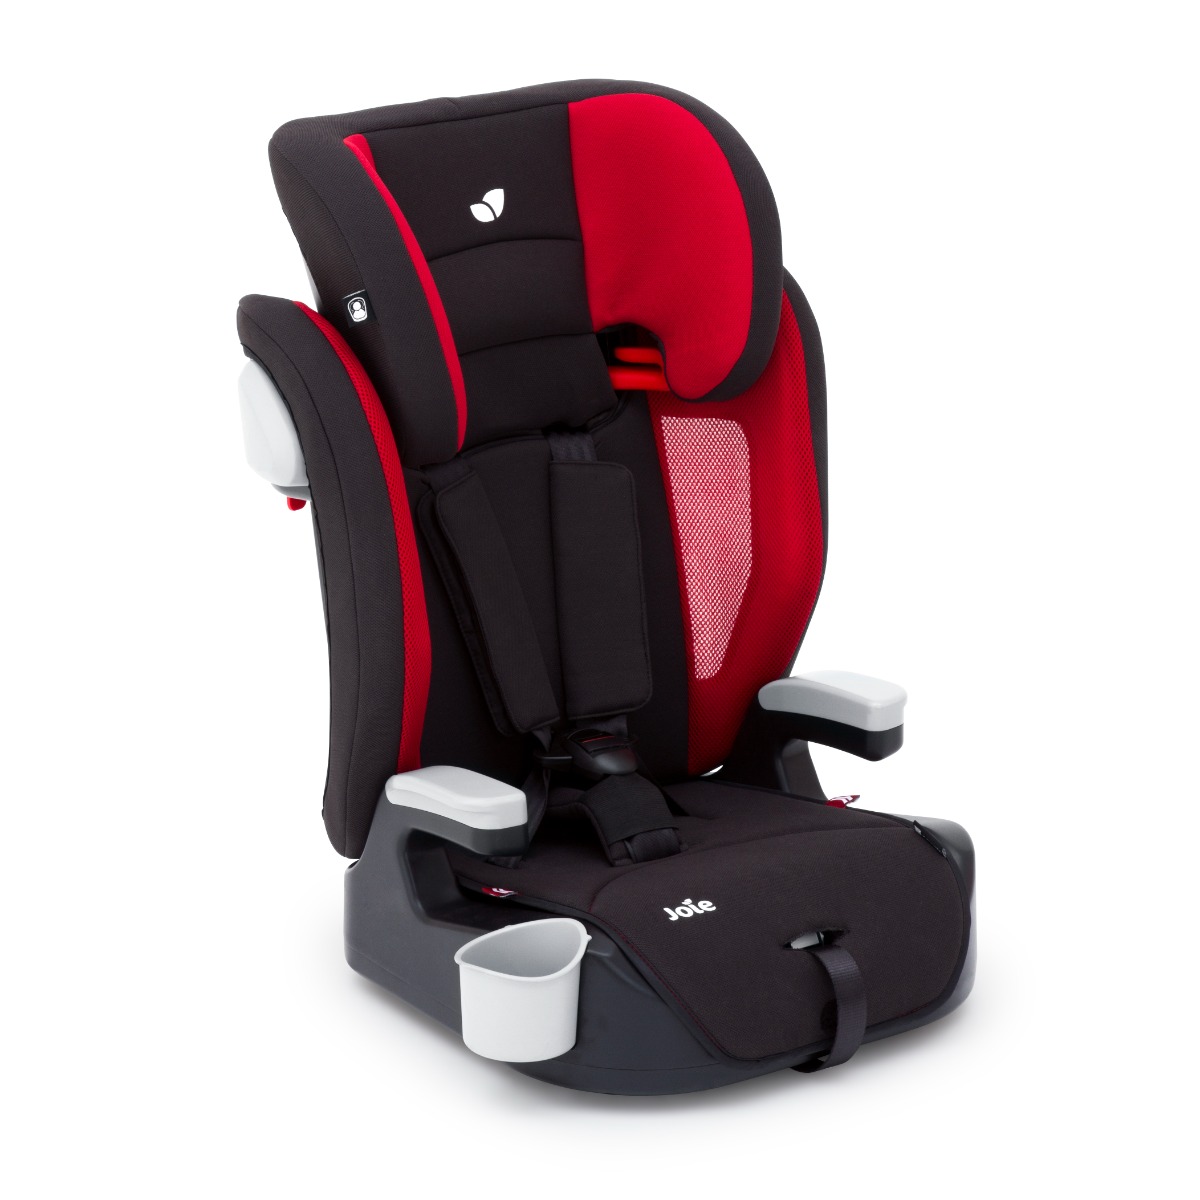 Joie Elevate booster car seat with 5-point harness in a black and red two tone colour, at an angle facing to the right.